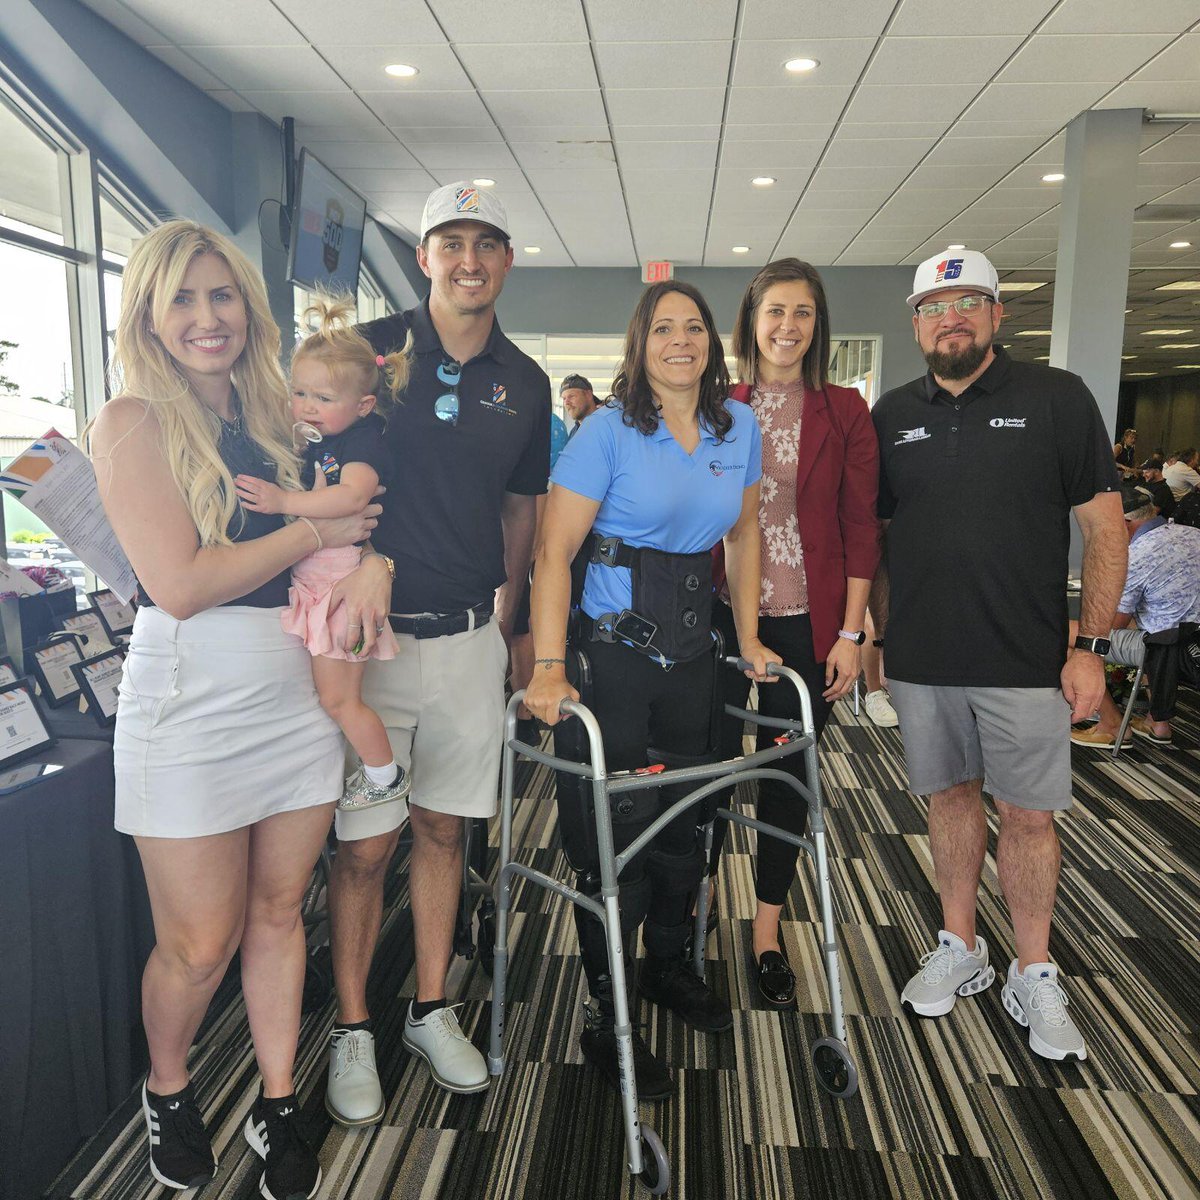 Thank you @GCRFoundation_, @GrahamRahal and @courtneyforce for hosting another successful Drivers Tournament to benefit SoldierStrong and @CSUOneCure! Many thanks to all of the supporters who continue to show up each year to uplift our heroes, especially @UnitedRentals🇺🇸❤️